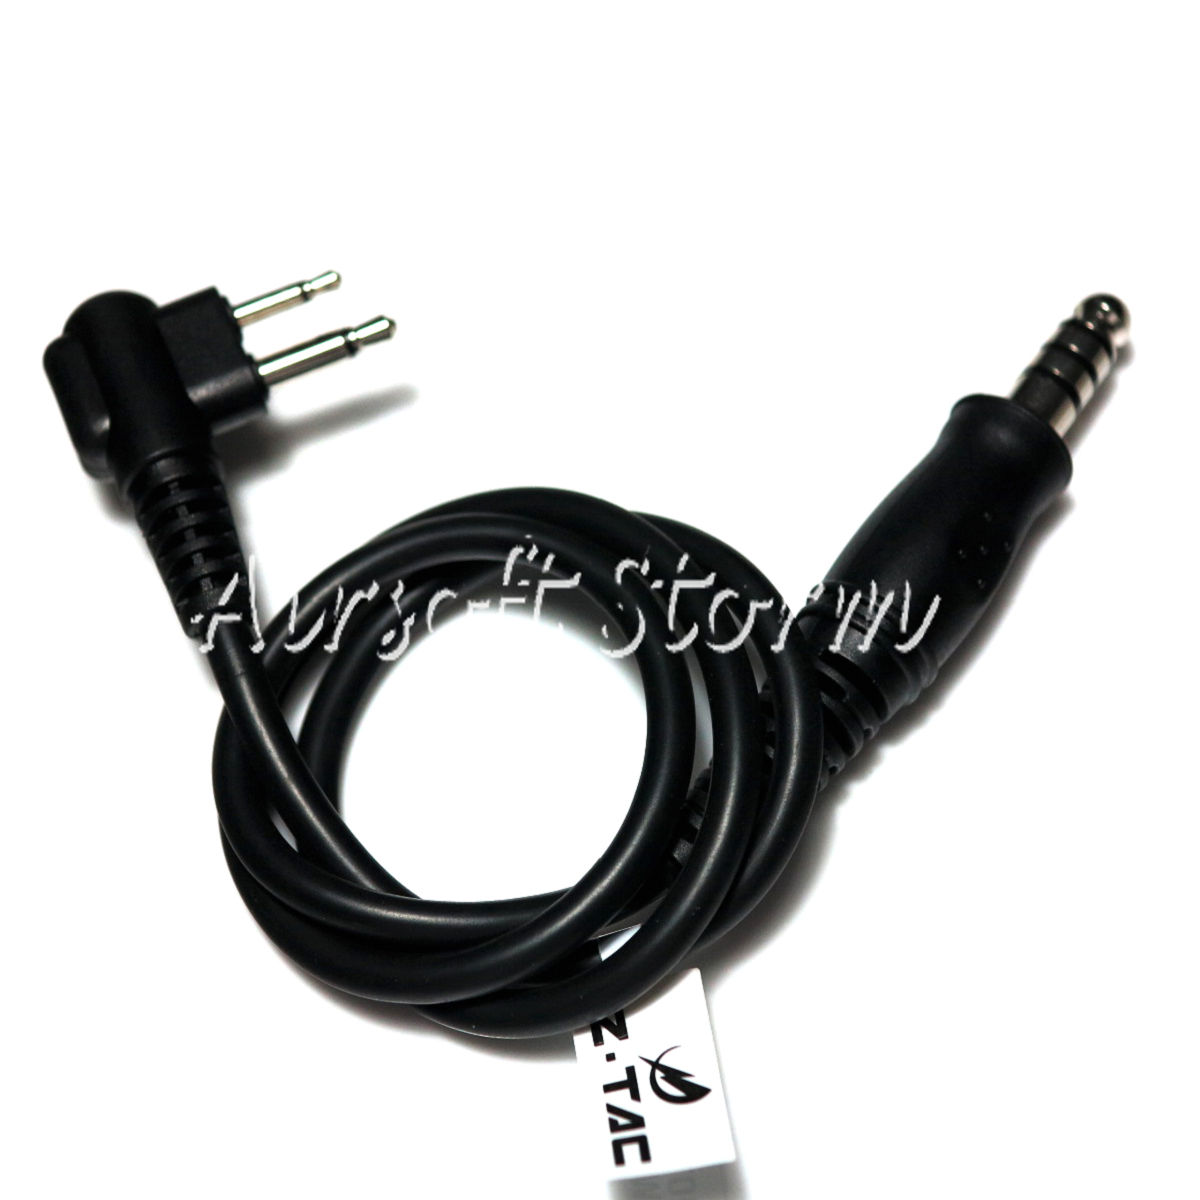 Airsoft SWAT Communications Gear Z Tactical Electronic PTT Wire for Kenwood Radio